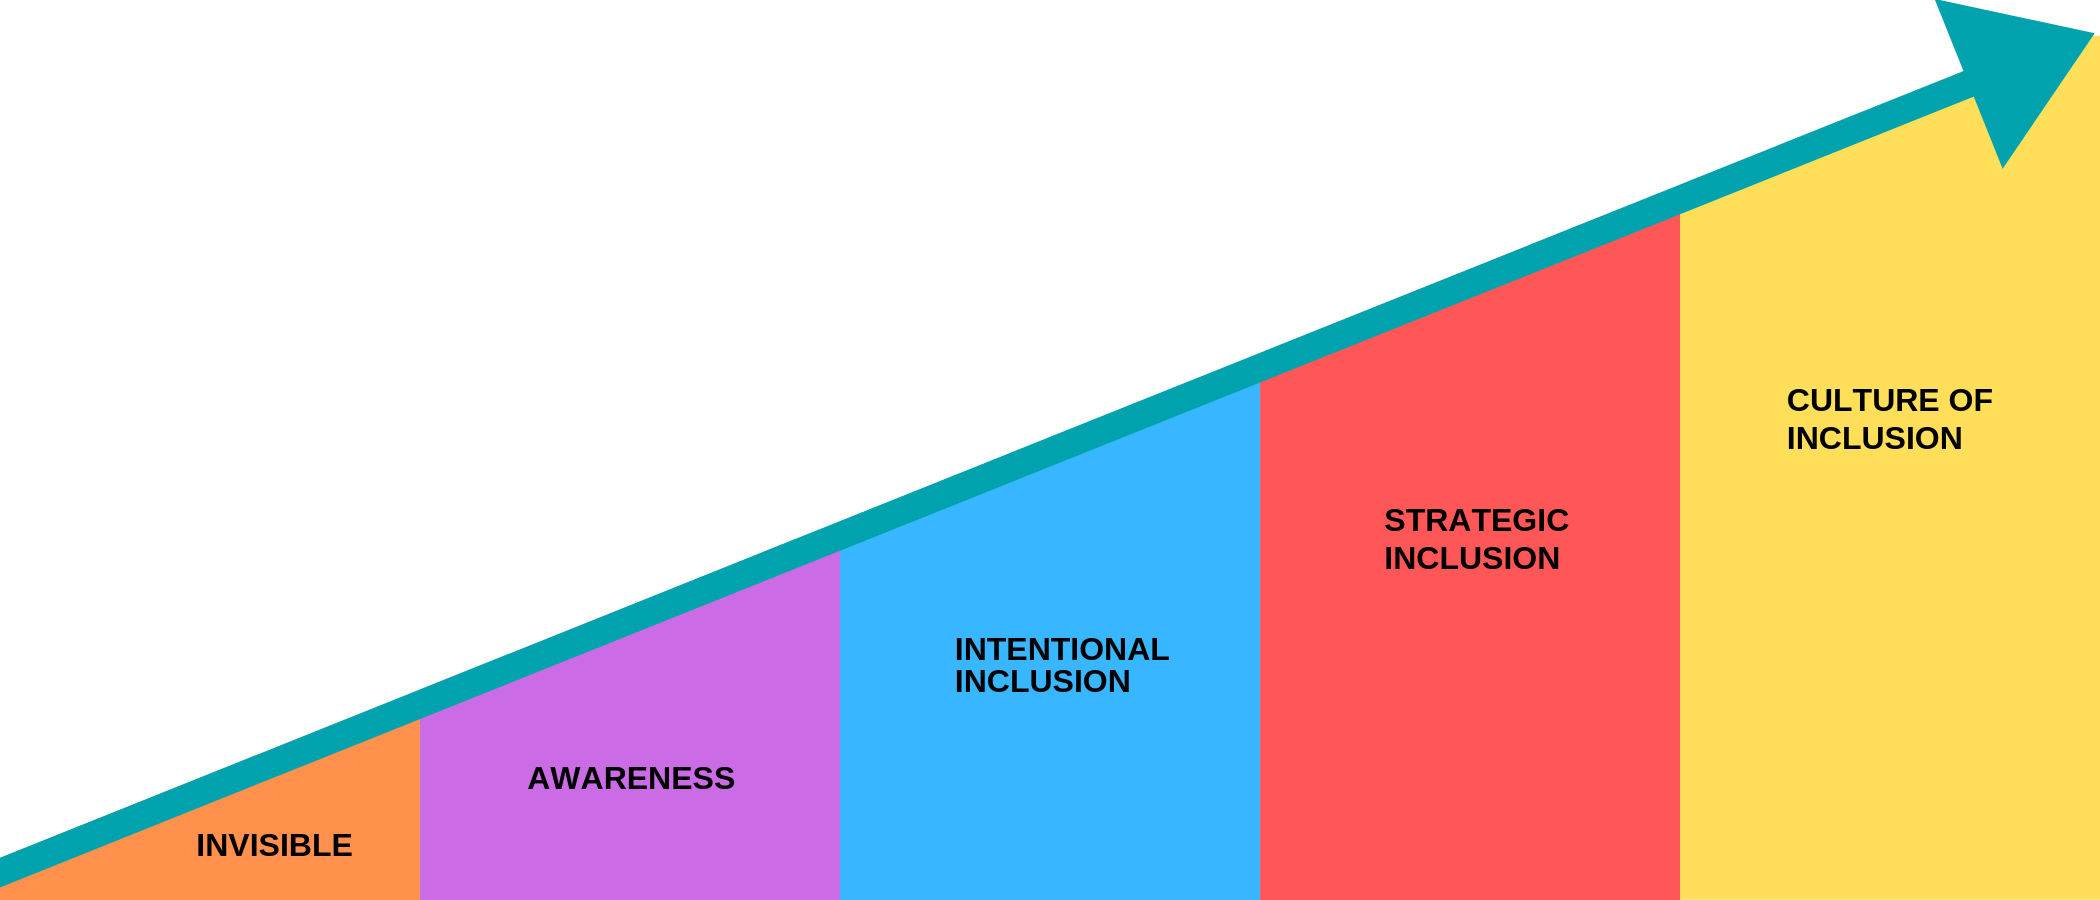 Invisible is the bottom level, followed by awareness, intentional inclusion, strategic inclusion, and culture of inclusion is at the top level.